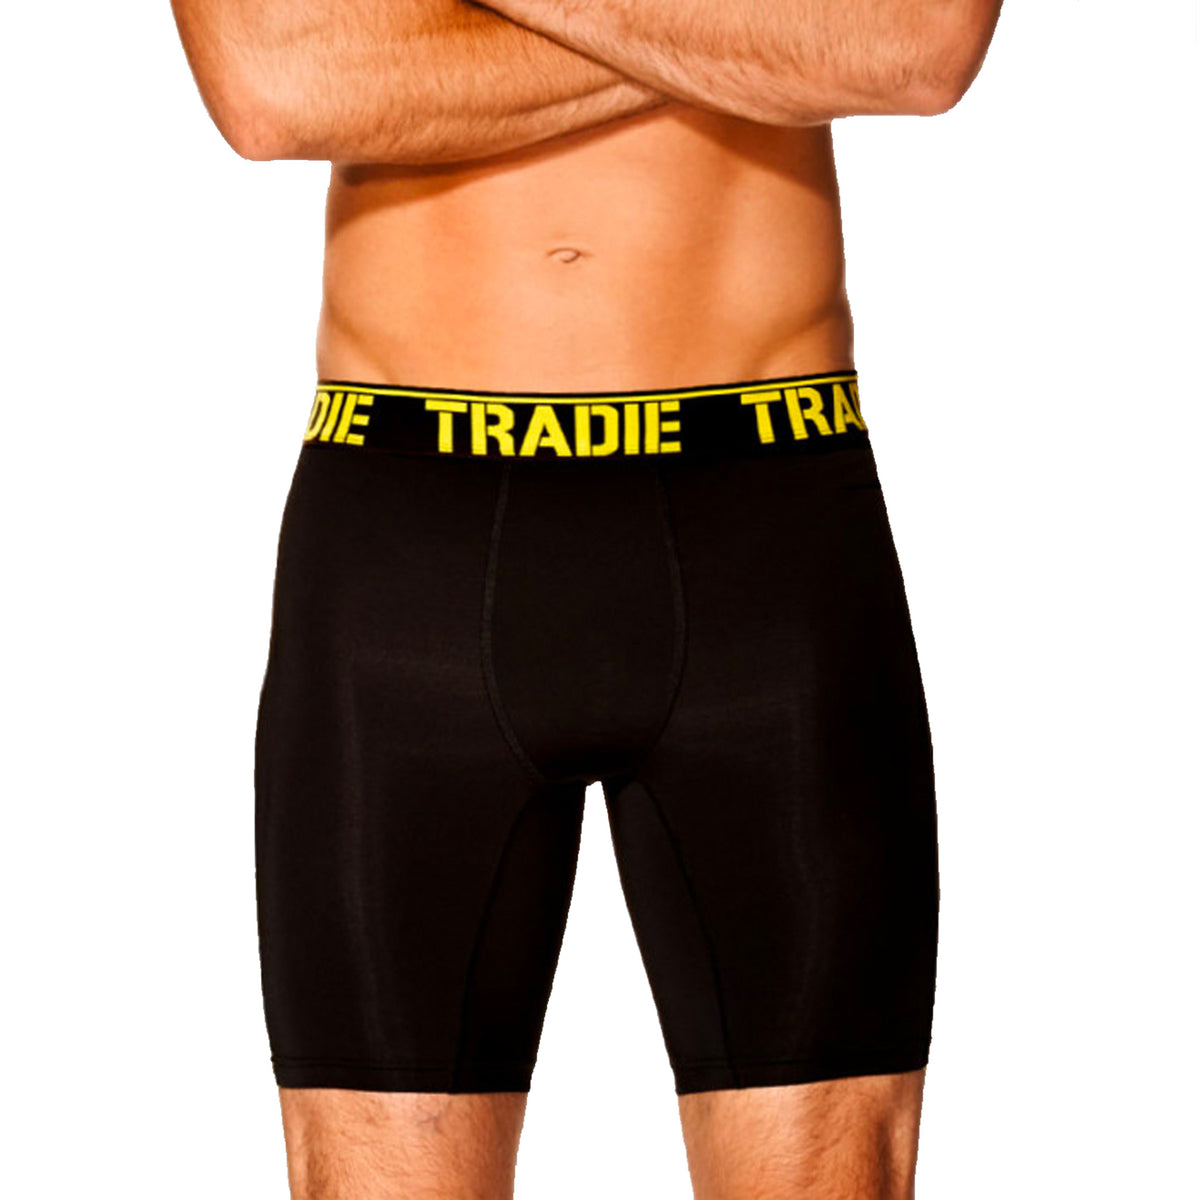 tradie long leg trunk in black and yellow